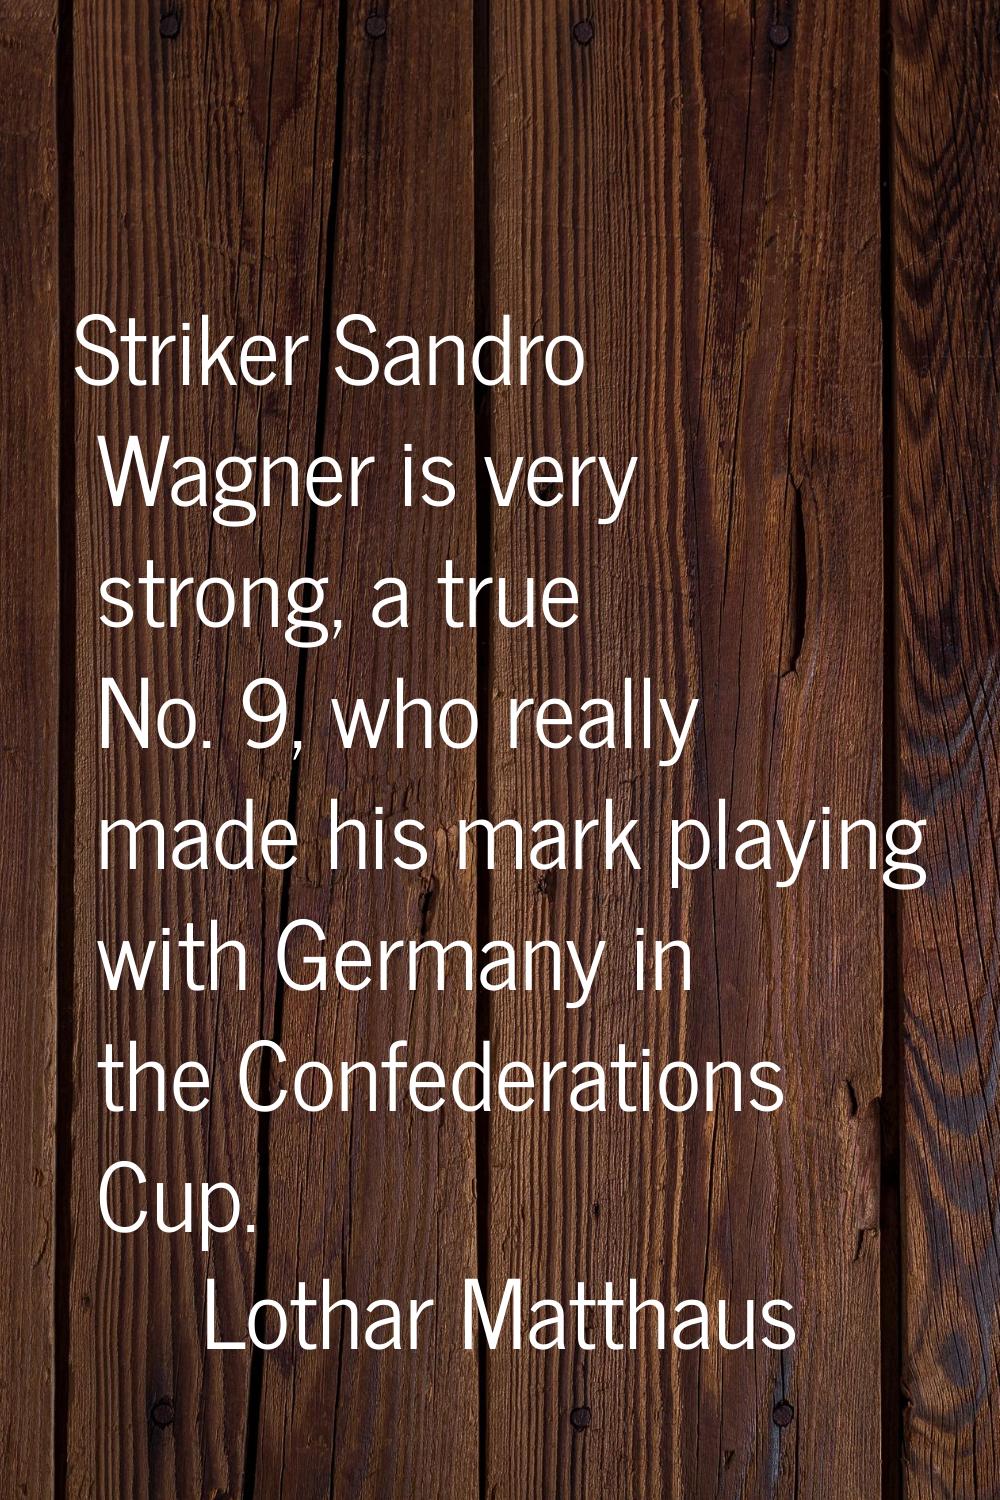 Striker Sandro Wagner is very strong, a true No. 9, who really made his mark playing with Germany i